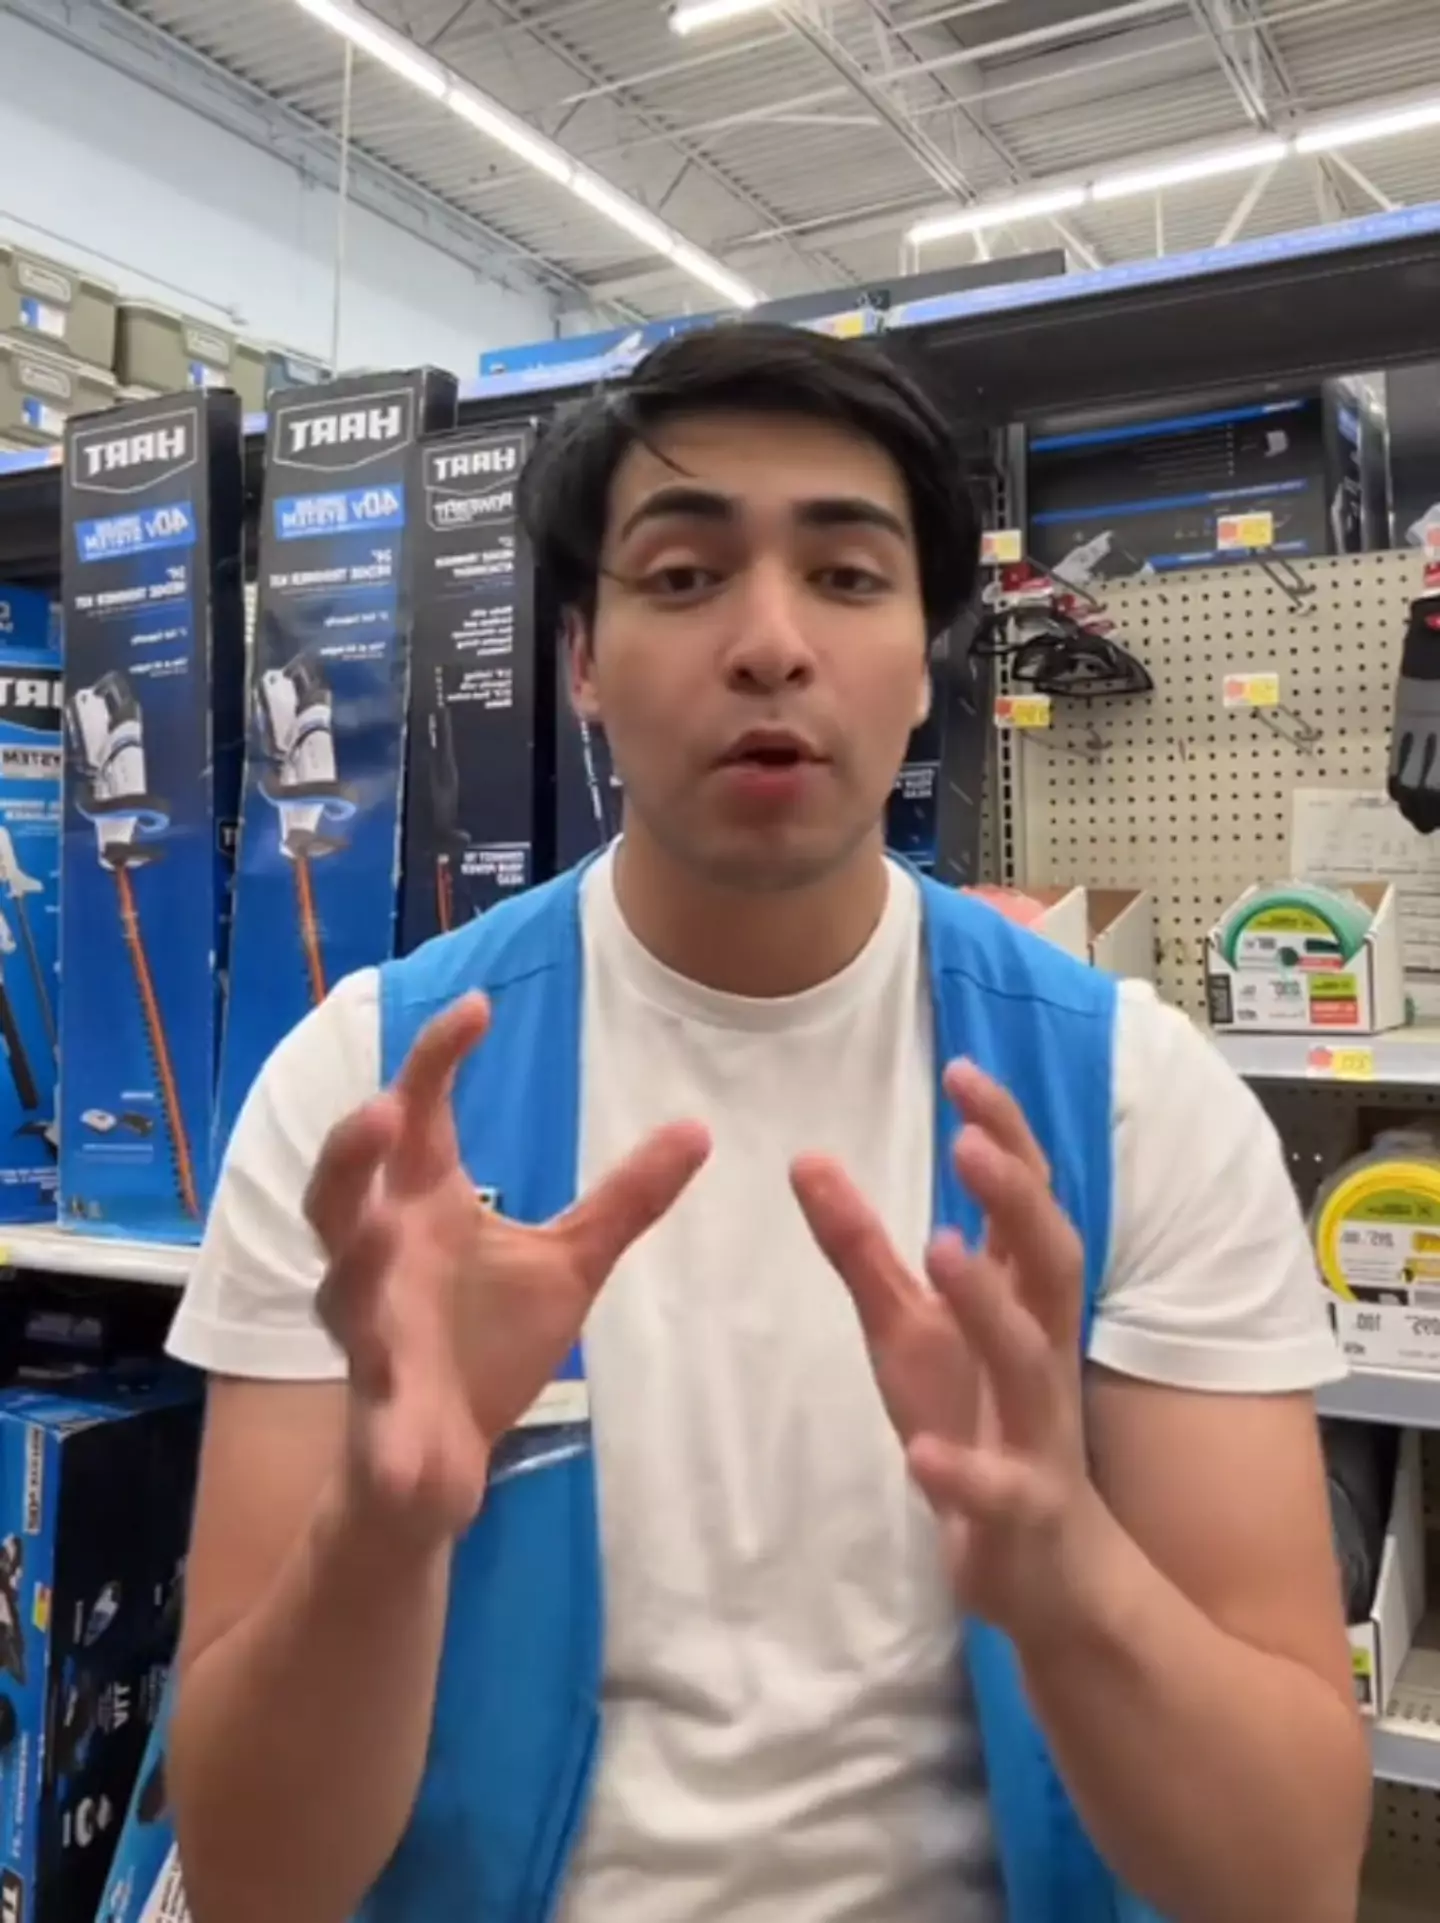 This Walmart worker let loose with his thoughts on late night shoppers.